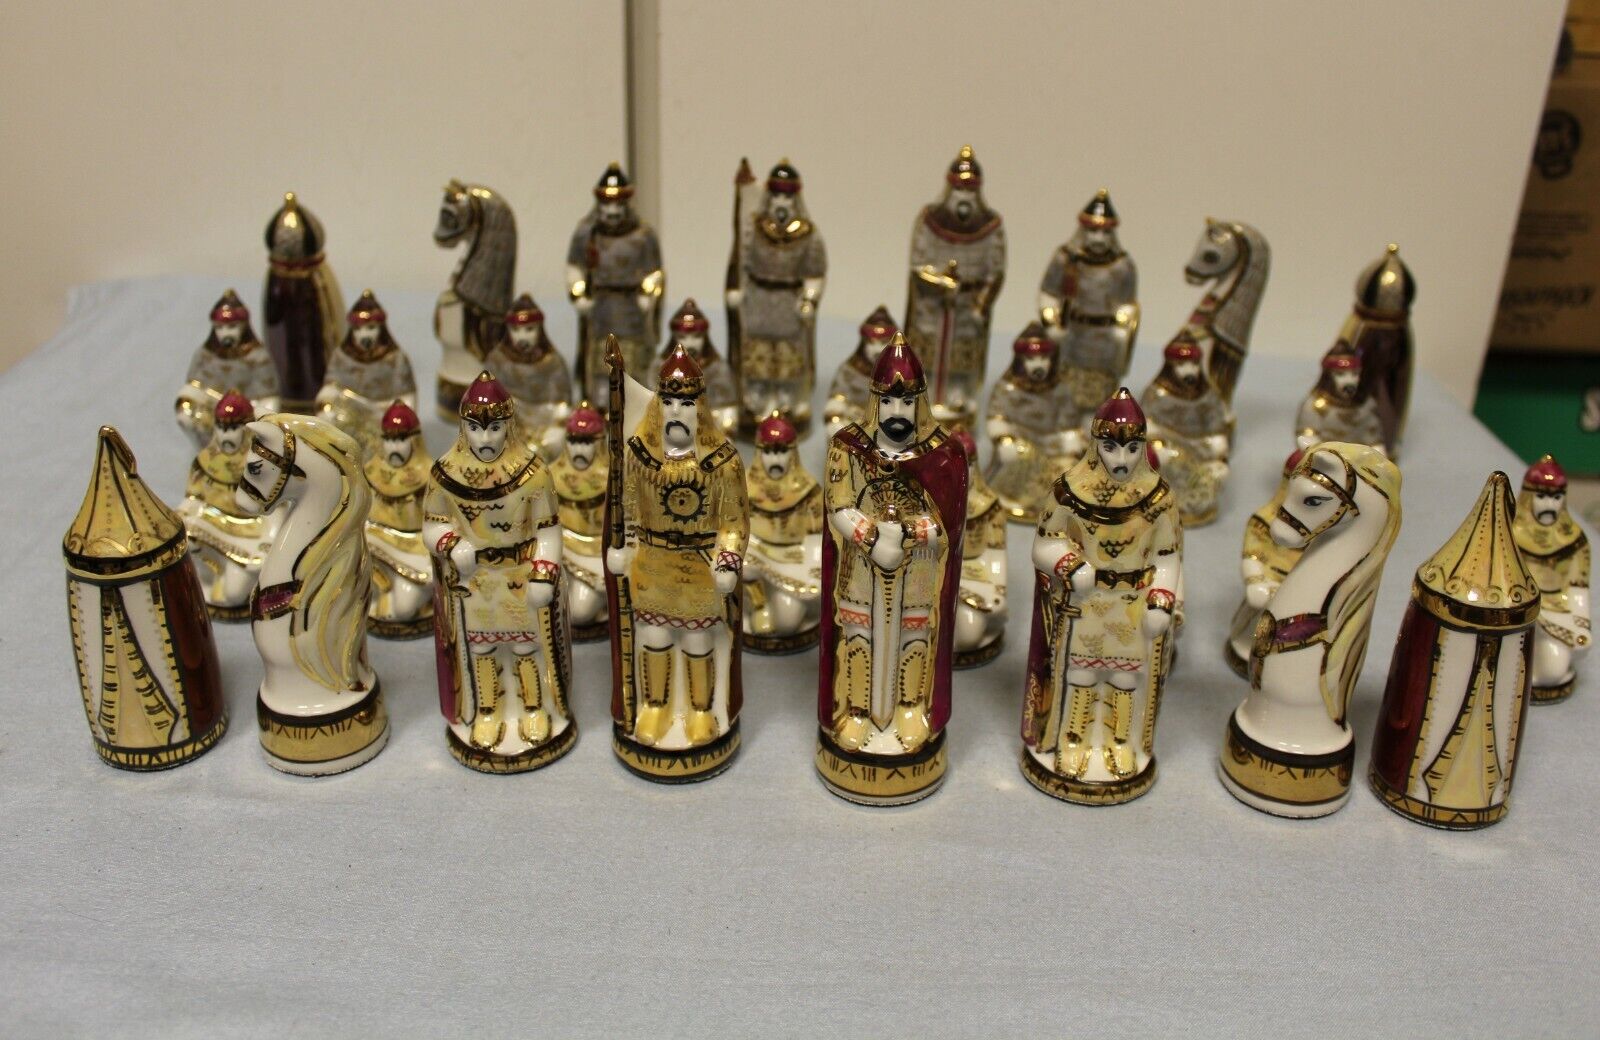 Russian Porcelain Chess Pieces. Very Rare. Absent in Porcelain chess index